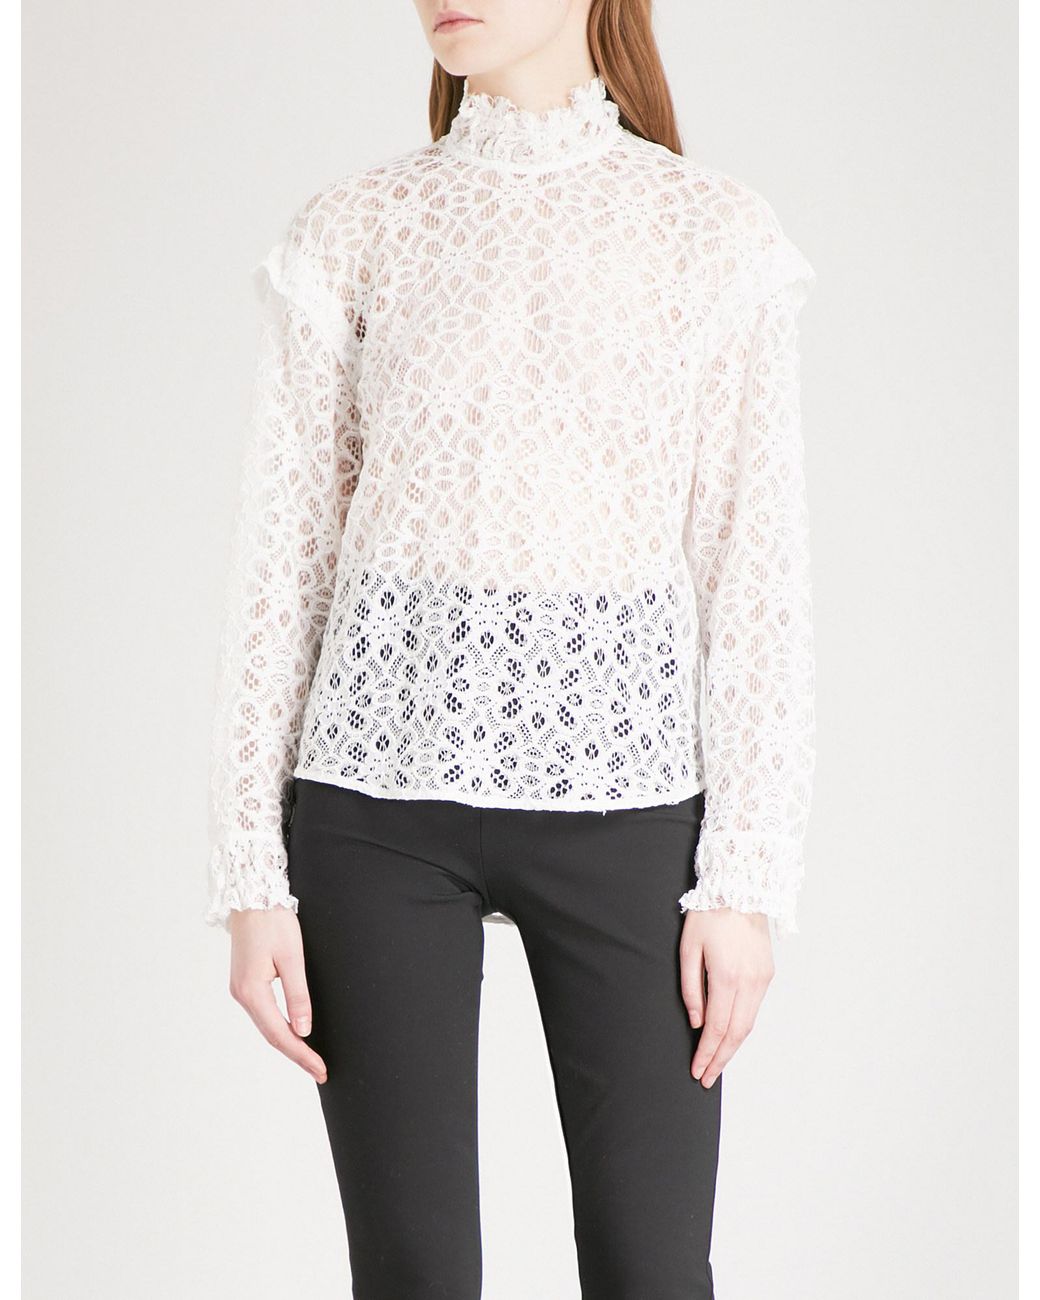 Sandro Ruffled Floral Lace Blouse in White | Lyst